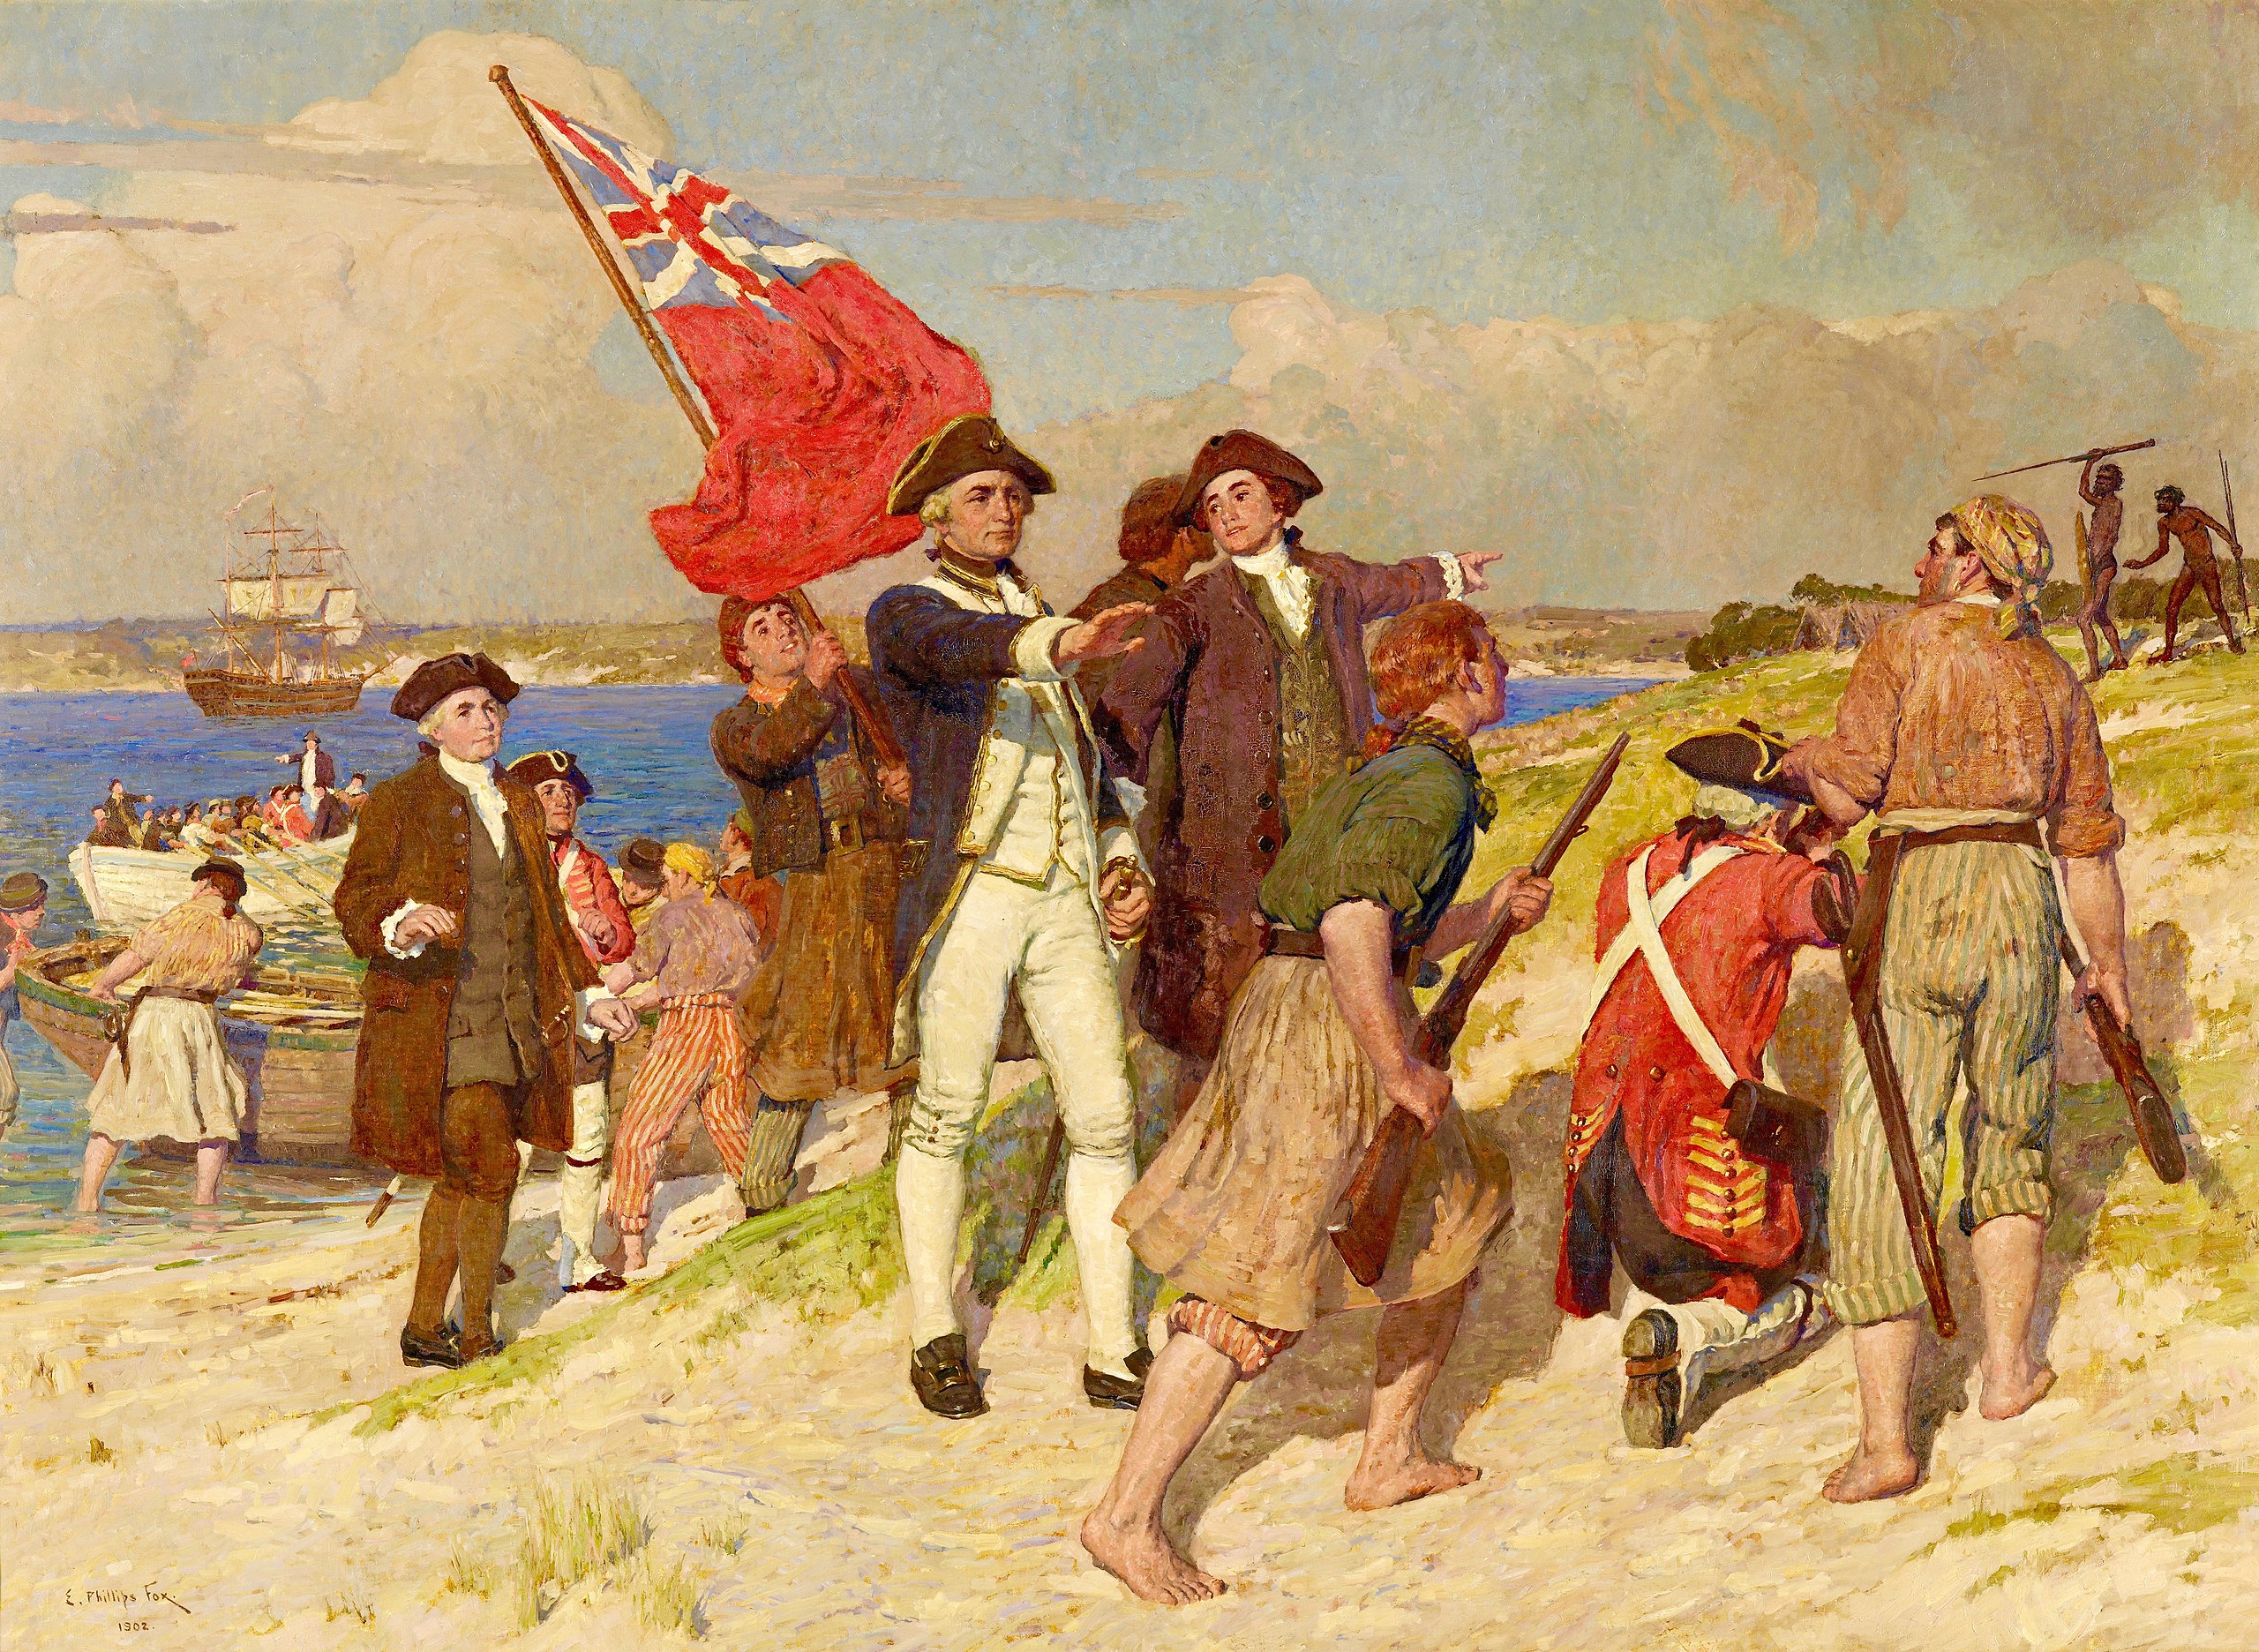 <p>Lieutenant James Cook’s first voyage, lasting from 1768 to 1771, was a landmark expedition funded by the British crown. Sailing aboard HMS Endeavour, Cook had a dual mission. Officially, he was to observe the transit of Venus across the sun from Tahiti. However, a more secretive objective was to search for the long-hypothesized continent of Terra Australis Incognita (Great Southland) in the Pacific. Cook’s exceptional navigational skills and meticulous charting led him to map previously unknown coastlines, including New Zealand, which Europeans had only briefly encountered before. The voyage also collected valuable scientific data and plant specimens, paving the way for his future groundbreaking expeditions in the Pacific.</p>